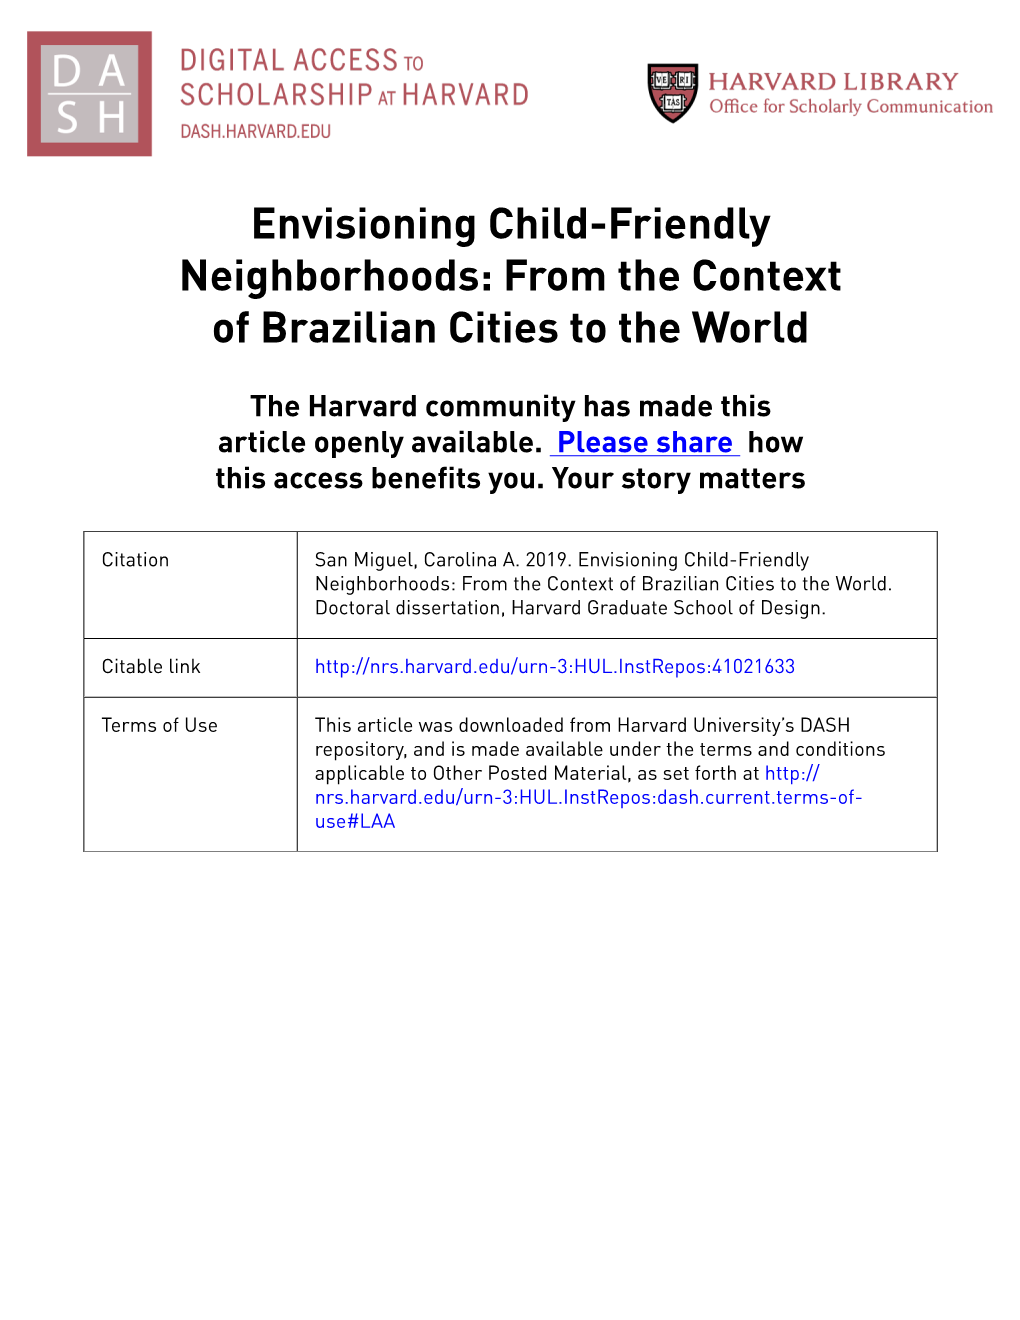 Envisioning Child-Friendly Neighborhoods: from the Context of Brazilian Cities to the World